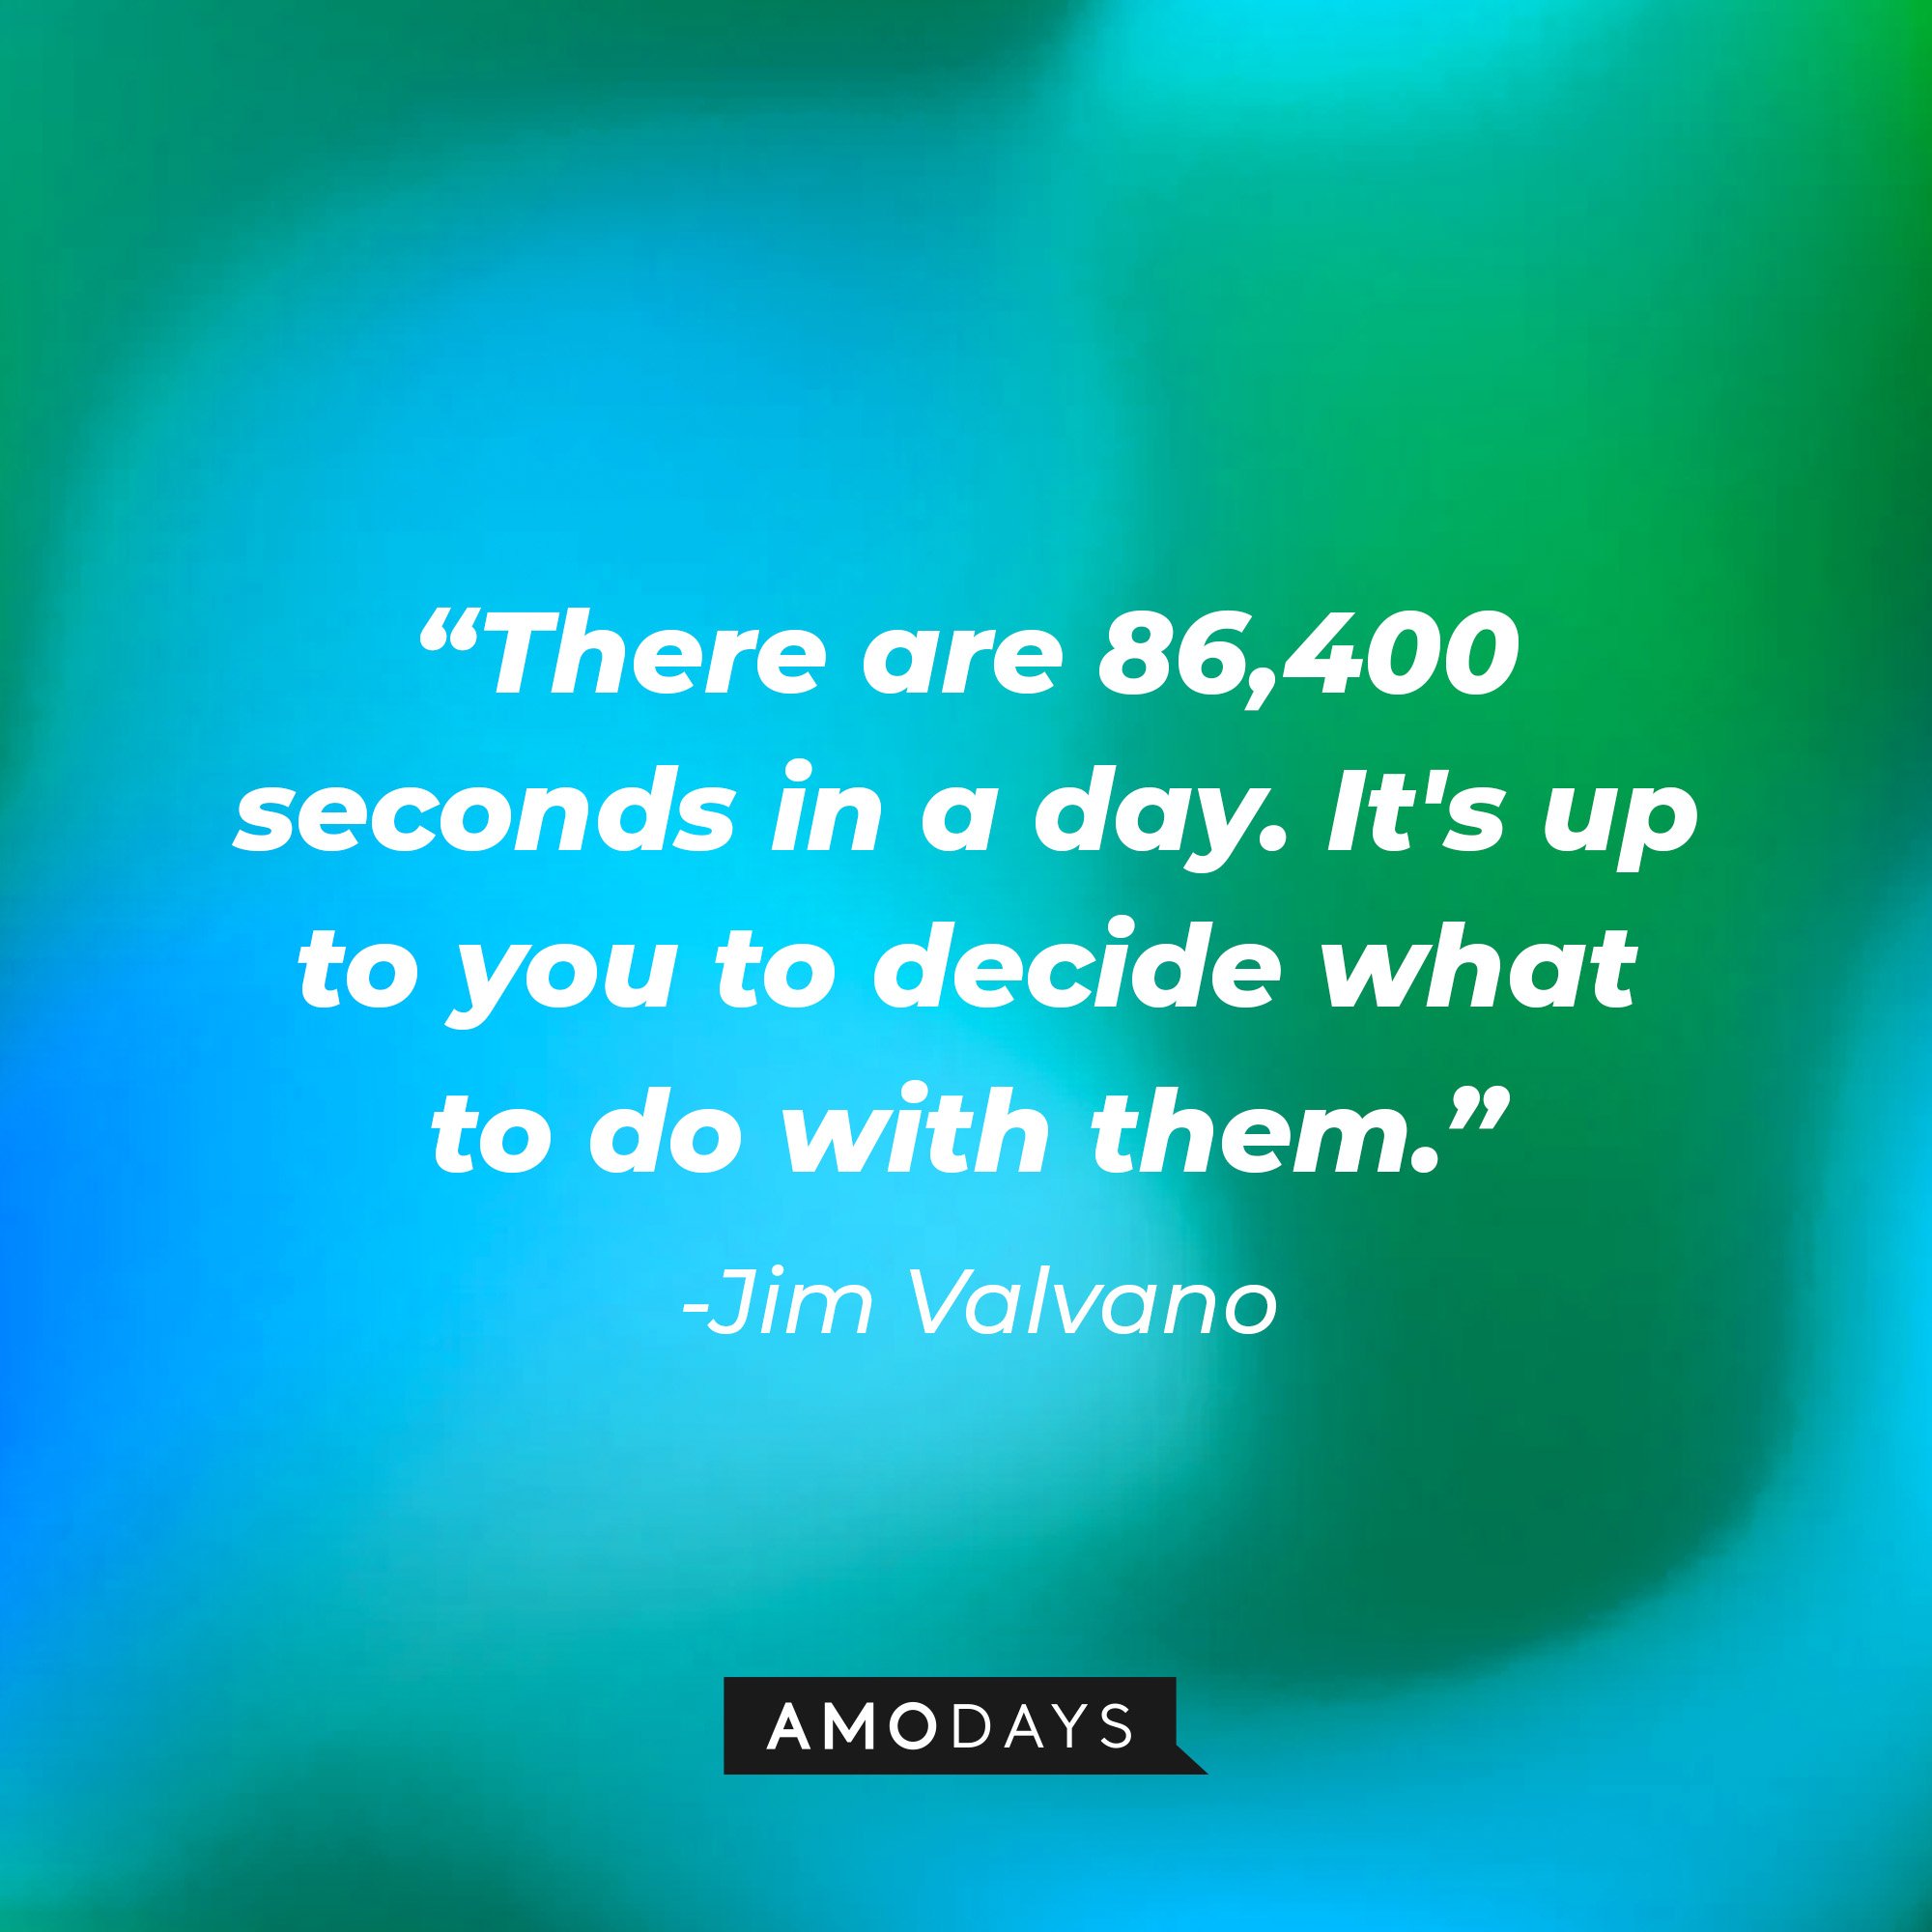  Jim Valvano’s quote: "There are 86,400 seconds in a day. It's up to you to decide what to do with them." | Image: AmoDays